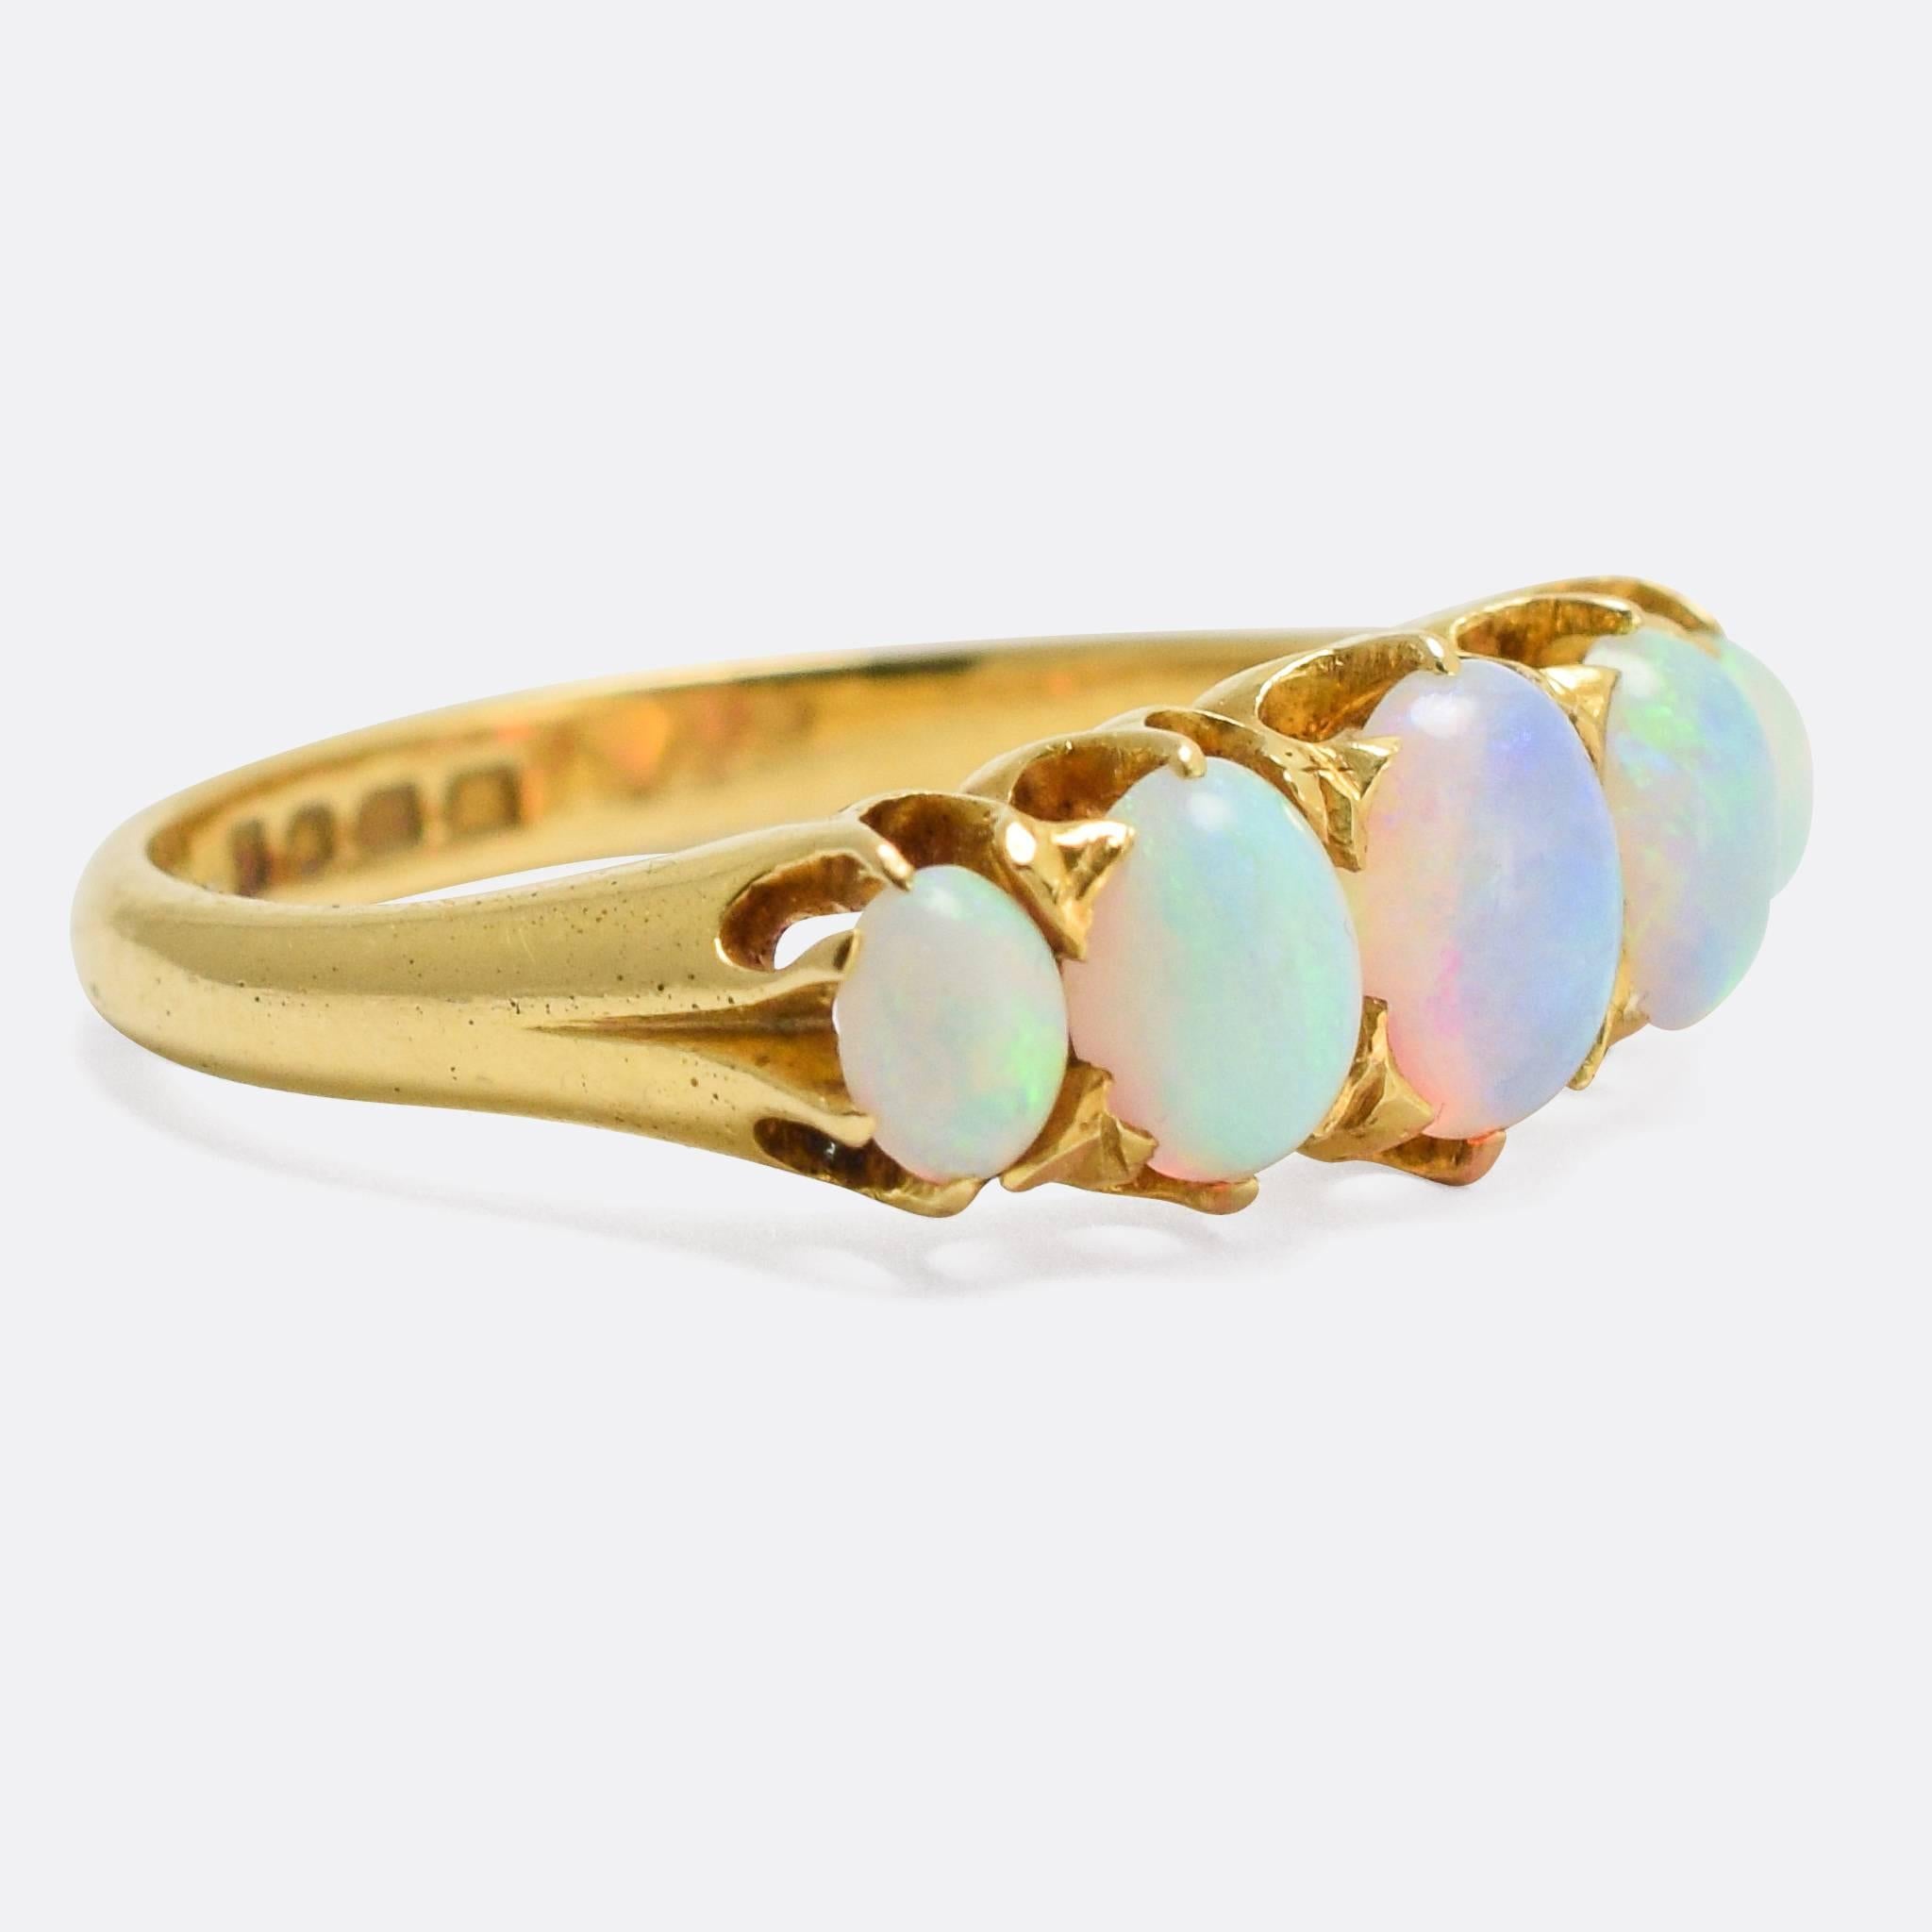 A classic Late Victorian 5-Stone Opal Ring, set with particularly vibrant oval cabochon stones. The scalloped claw settings are very typical of the era - it was made in the year 1900 - and the piece is modelled in 18 karat gold, with clear hallmarks